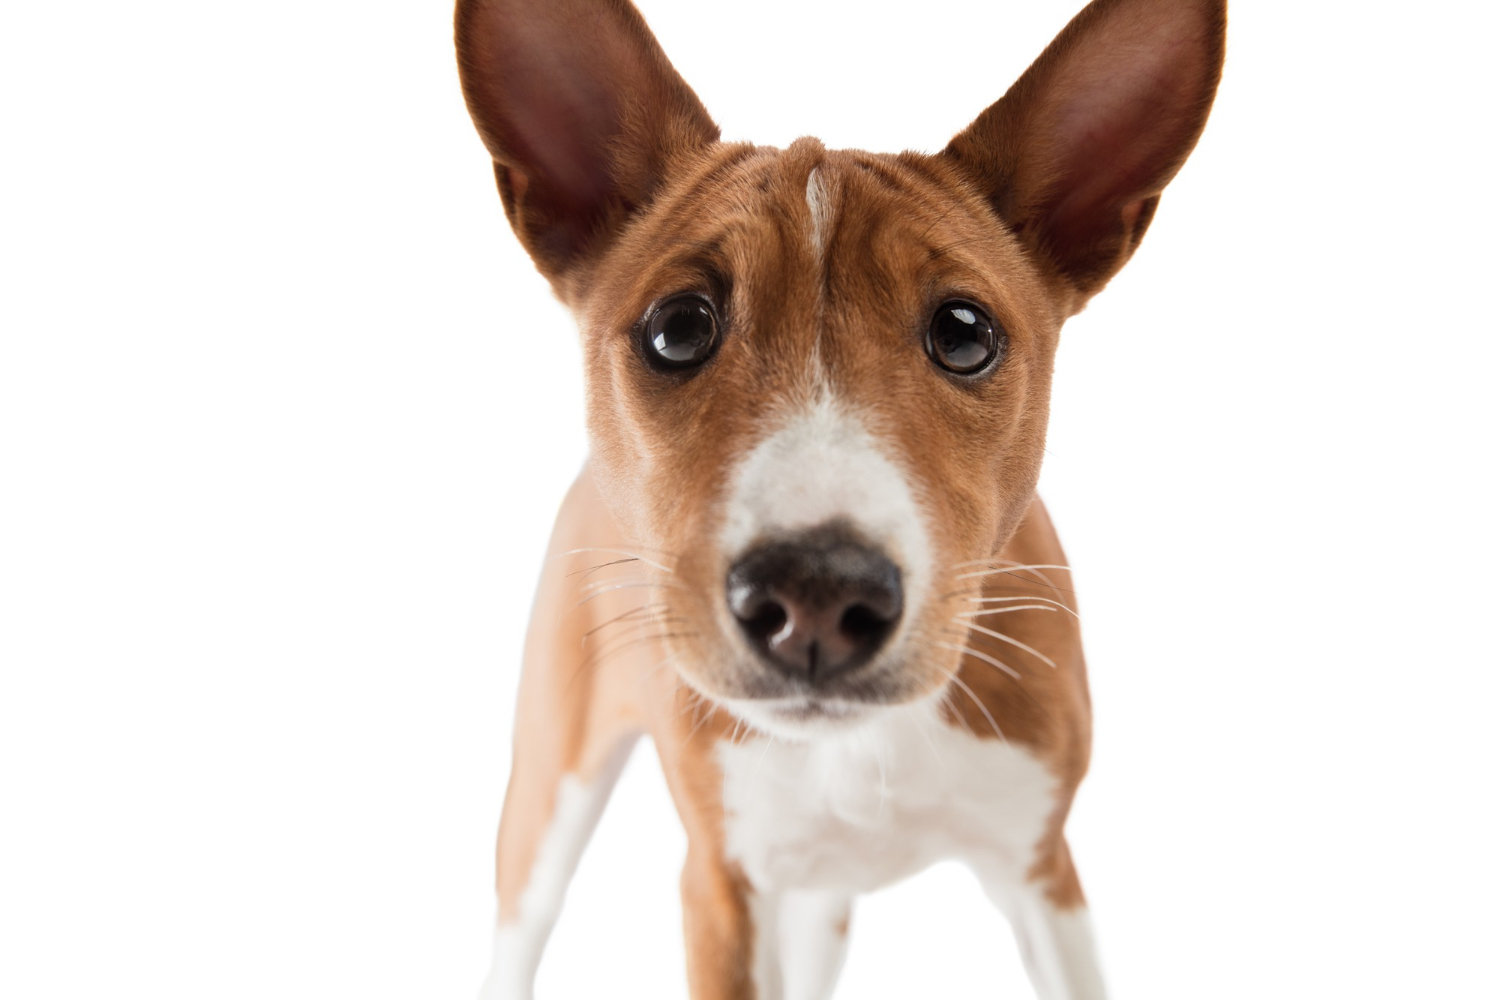 How to Basenji Adopt Are you thinking of adopting a Basenji? These hound dogs are highly intelligent and very affectionate, but they can also be independent. Here is how to adopt one! Read on to learn more! And if you haven't already, read about Basenji rescue! Camp Basenji is a fantastic rescue organization that saves, rehabilitates, and provides foster homes for dogs in need. Their mission is to provide second chances to these dogs so they can find new homes. Basenjis are hound dogs A breed of hunting dog, the Basenji was developed in central Africa and was originally bred from primitive stock. Their yodel-like sound is a unique characteristic, as is their unusually shaped larynx. The Fédération Cynologique Internationale places the Basenji in the primitive or Spitz category. Its distinctive rounded ears are an attractive feature of this breed. Basenjis are known to be especially prone to chasing rabbits. While Basenjis are not notorious for barking, they are quite energetic and need plenty of exercise. A large yard is recommended, as they can become destructive if not given enough exercise. Keeping an eye on them is also a must. They are great escape artists and need constant supervision. As with any hound dog, a Basenji must be supervised at all times, especially in the yard. While they don't mind living with cats, they shouldn't be left alone in an apartment with other small pets. The Basenji has short, fine fur. Its coat is either chestnut red, black, or a tricolor. The dog's feet and tail tip are white. Its coat color can vary from chestnut red to chestnut or a brindle color. White feet and a white collar are other characteristics of the breed. The Basenji's coat is extremely clean and shiny, and it sheds less than any other breed. They are intelligent The Basenji breed is a very intelligent, stubborn dog. They are ranked second to last in the breed's intelligence, but it is not because of intelligence, but because of their stubbornness. These dogs are highly intelligent, and the breed is prized for its independence and independent thought. These dogs are known for their loyalty to their owners and are friendly with family, although they can be standoffish when meeting strangers. The following is a brief overview of the personality and health characteristics of the Basenji breed. Training a Basenji is a challenging process. While they are very intelligent and observant, they can be stubborn and easily get bored with training. While a Basenji may be capable of learning a new skill, they are not particularly interested in following instructions. This breed needs constant positive reinforcement to stay motivated, so training sessions should be short and full of praise. Regardless of the level of your Basenji's intelligence, you should expect it to be an excellent companion for many years to come. The Basenji dog breed was developed in the Congo as a hunting dog. They use sight and smell to find prey. Their original purpose was to flush small game into hunters' nets, but now they make excellent family pets. Historically, the Basenji was used as a pet for Egyptian Pharaohs. While it is unlikely that they were kept in the Egyptian Pharaohs' household, the dog's intelligent and lovable nature may have contributed to the dogs' popularity. They are affectionate A Basenji's affectionate nature can be quite endearing, and they will do almost anything for their owner, including licking and grooming themselves. These dogs are among the cleanest breeds, and they love to spend time grooming themselves after a walk. Since their grooming habits are more like that of cats than dogs, they do not smell as bad as most other breeds. Also, they will use their paws to clean themselves rather than their mouths, which can leave them very smelly. Basenjis show affection by staring into their owners' eyes. Eye contact releases the chemical oxytocin, which helps form a stronger bond between owner and dog. Some dogs may find this eye contact threatening, however, and they should be kept away from them at all times. Other Basenjis will lick their owners to express their affection, but not all of them do it. A Basenji will cover you with saliva if he is feeling lonely. A Basenji is a pack animal, and while they are very affectionate and playful, they may be overly aloof around other dogs. They can become difficult to train and are often prone to ignoring their owner. Even if you do train them to become a good pet, it's important to be consistent and positive in your interactions with them. Unless you plan to leave them alone for long periods of time, they may act out. They are independent As the name suggests, Basenjis are independent dogs that are not easily trained. While they are known to be "barkless" dogs, they are prone to yodeling and chewing when they get lonely. Despite their independent nature, they are excellent companion dogs, and love to explore. Despite their aloof and independent personality, Basenjis make great pets. Listed below are some common traits of the Basenji breed. Aside from being intelligent, the Basenji is also a bit stubborn. Some sources rank this breed in the bottom half of the intelligence scale, but this trait was coveted for its independent thinking. While these dogs are obedient to their owners, they can be aloof to strangers. This trait makes them great companions for families, but they can be standoffish when meeting strangers. Therefore, it is important to train your Basenji in a way that he will respect your boundaries. Although the Basenji is not a hunting dog, they like to be active and participate in activities such as agility or lure courses. Although they are not commonly used for hunting, they are wonderful family dogs and live up to 13 years of age. They require early socialization and exercise and are good watchdogs. The females of the breed only have one heat cycle per year. They also make a distinctive yodel, which is a common sign of mischief. They are a good companion for active families Basenji are great pets for active families. These dogs are high energy and do well with children, provided they are properly socialized and trained. Basenjis are notorious for chewing and should be handled carefully. If you have young children, they might motivate them to clean up after them! Here are some basic training tips for Basenjis: Basenji are friendly with children, but can be quite a handful. They do not tend to bark much, but will growl or yodel to express their feelings. Children may be a little scared of these dogs, and you'll have to be extra vigilant when playing with them around young children. Basenjis are also good with cats and other small family pets, but they should be socialized properly to make sure they don't become a nuisance. Basenjis require more than a yard to thrive. You'll need to spend time training your new companion. You must be patient and dedicated, because these intelligent dogs need a lot of attention. While they may seem quiet, they talk up a storm when they're with their owners. While they don't bark, the yodel they emit is quite distinctive and will give you plenty of entertainment. Basenjis enjoy active lifestyles. They enjoy agility, lure courses, and dog sports, and are often a great addition to active families. They also outlive most other breeds, and live to be around 13 years old. However, they're fiercely protective of their family, so they must be socialized at a young age. As long as they have lots of time to play with you, Basenjis can be a fun companion for active families. They require a lot of exercise If you are considering getting a Basenji for your home, you've probably wondered if they need a lot of exercise. These large, energetic dogs should get at least an hour of exercise every day. While you may not have to do much of that in a daily routine, Basenjis do have a strong instinct to hunt. When out and about, keep an eye out for their famous "predatory look." If you see a dog hunched over and focused, your puppy is probably scouting a game. If you see that behaviour, immediately remove the dog from the area. Basenjis are very intelligent dogs, and they like to use devious tactics to reach their goals. You should exercise them regularly to allow them to release their energy and to keep their minds sharp. Basenjis also need a lot of exercise, because they are notorious for chewing walls, pulling stuffing out of couches, and destroying their yard. This breed is not suitable for homes with young children, because it may become confused and destructive if it is left alone. If you choose to get a Basenji, be prepared to spend a good amount of time grooming and combing their coat. Although the breed's coat is short, it still needs to be brushed frequently to remove dust and a layer of loose hair. While a Basenji will not require baths more than twice a year, you should brush its teeth at least once a week to prevent dental disease and bad breath.